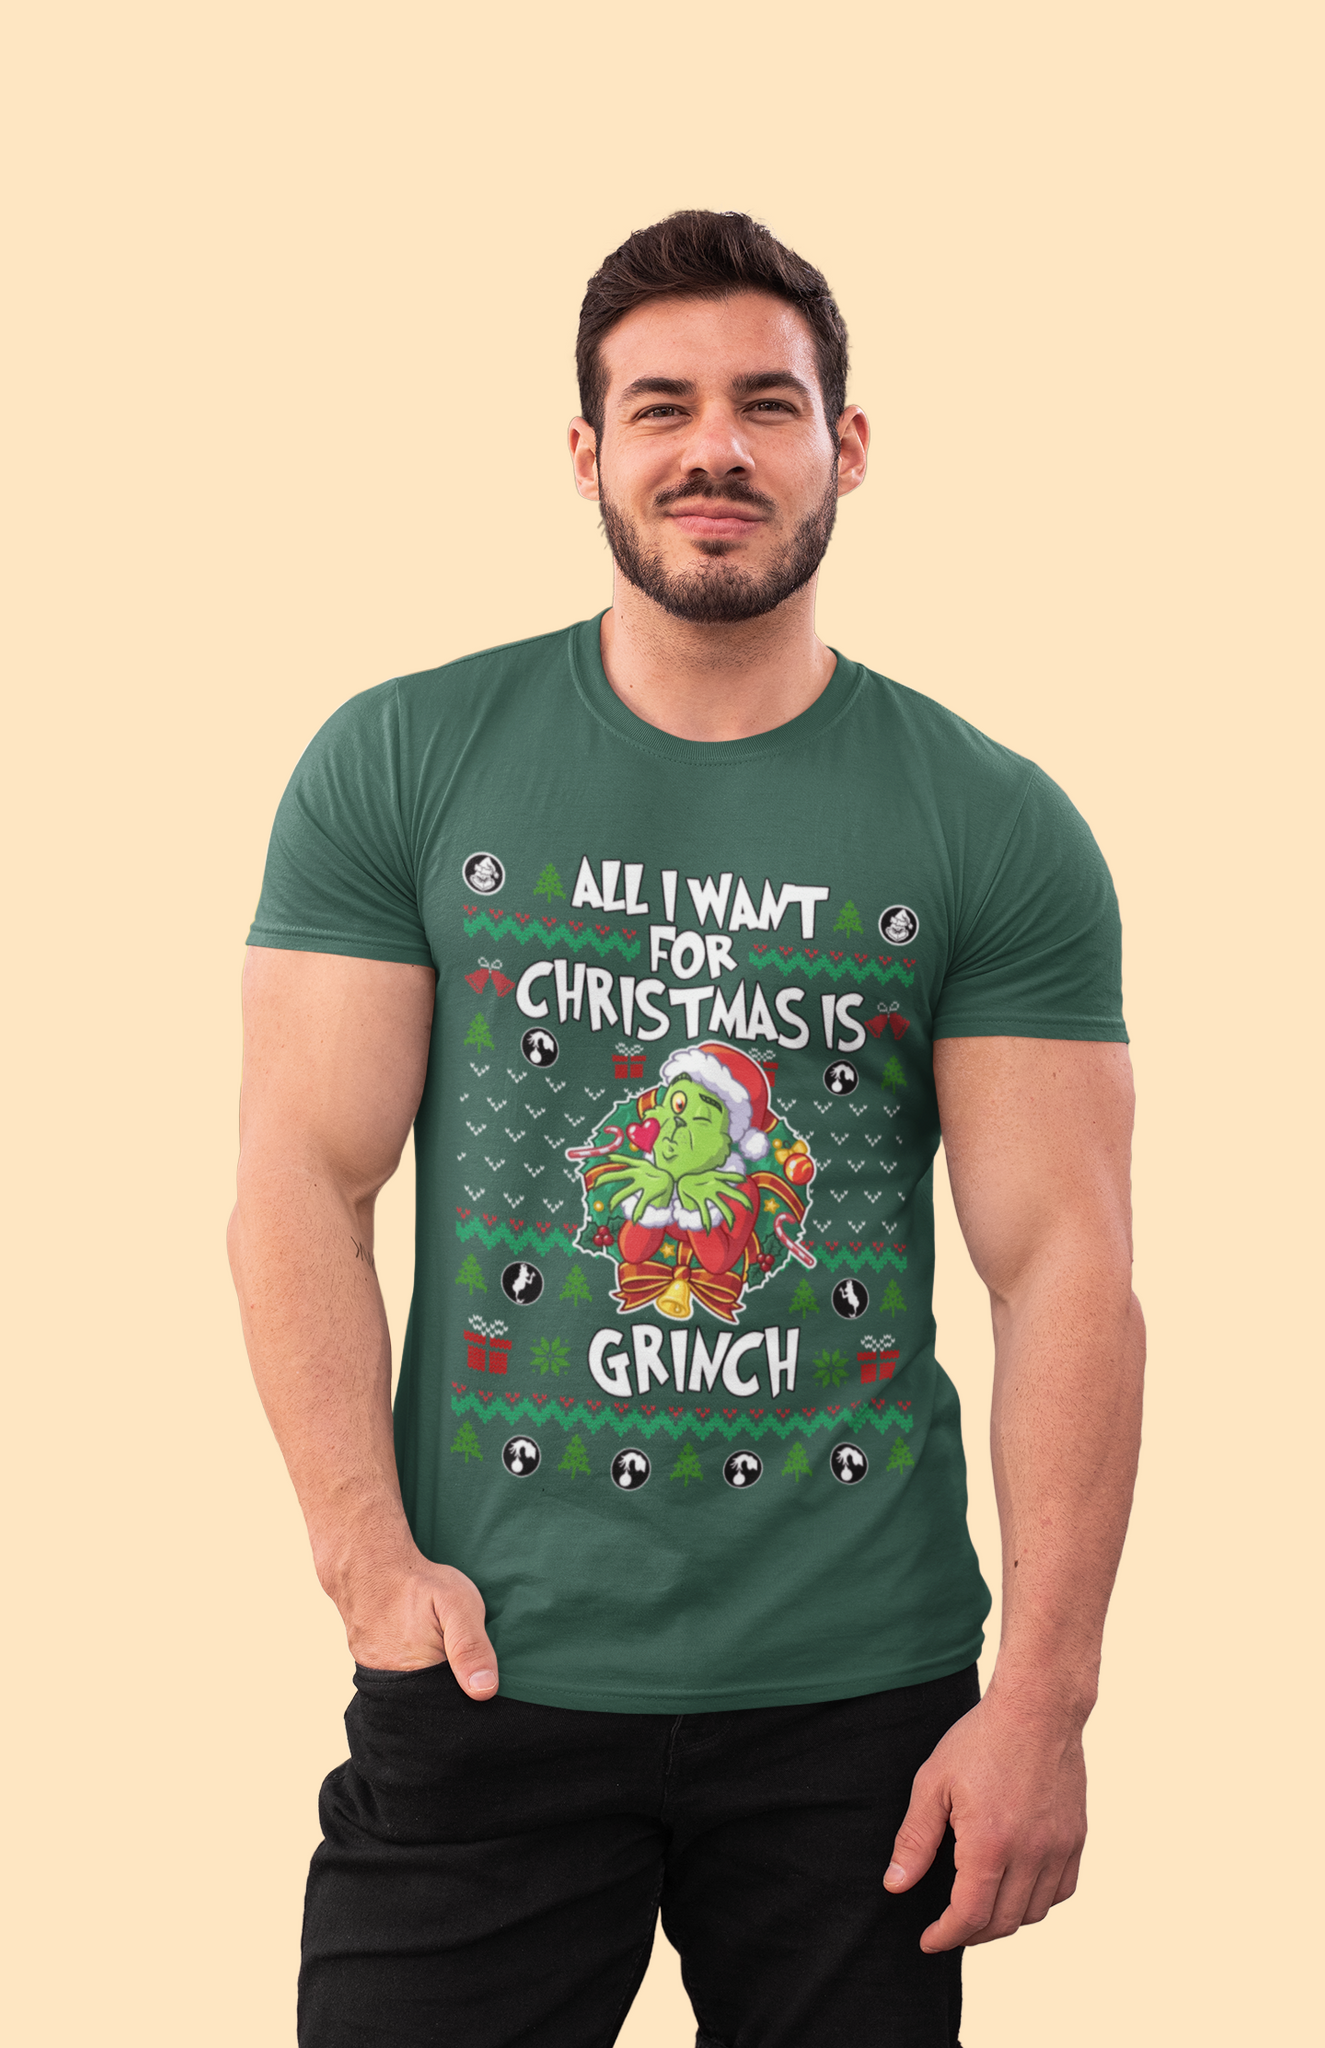 Grinch Ugly Sweater Shirt, All I Want For Christmas Is Grinch T Shirt, Christmas Movie Shirt, Christmas Gifts